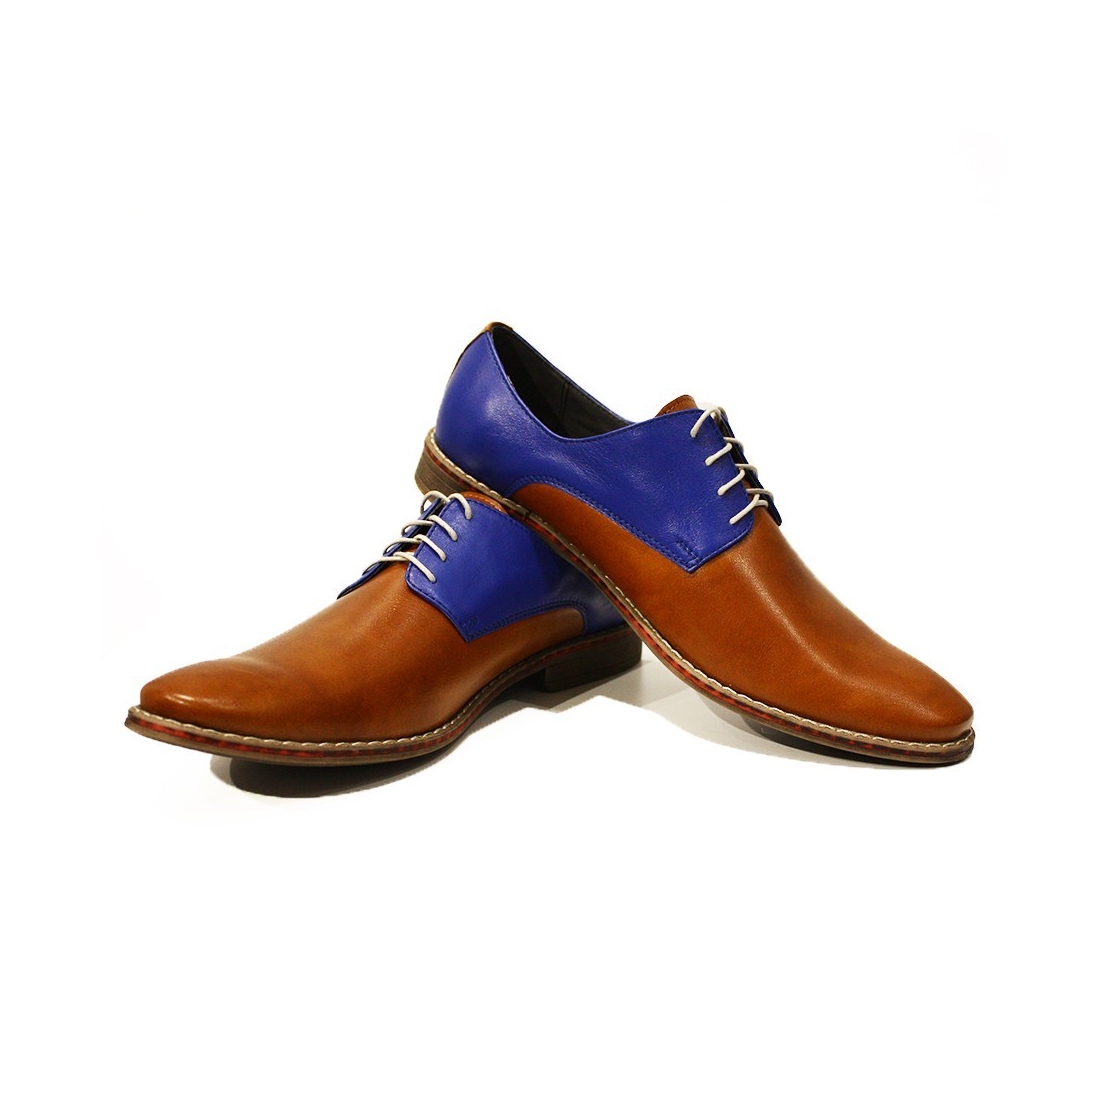 Modello Flavio - Brown Lace-Up Oxfords Dress Shoes - Cowhide Smooth Leather